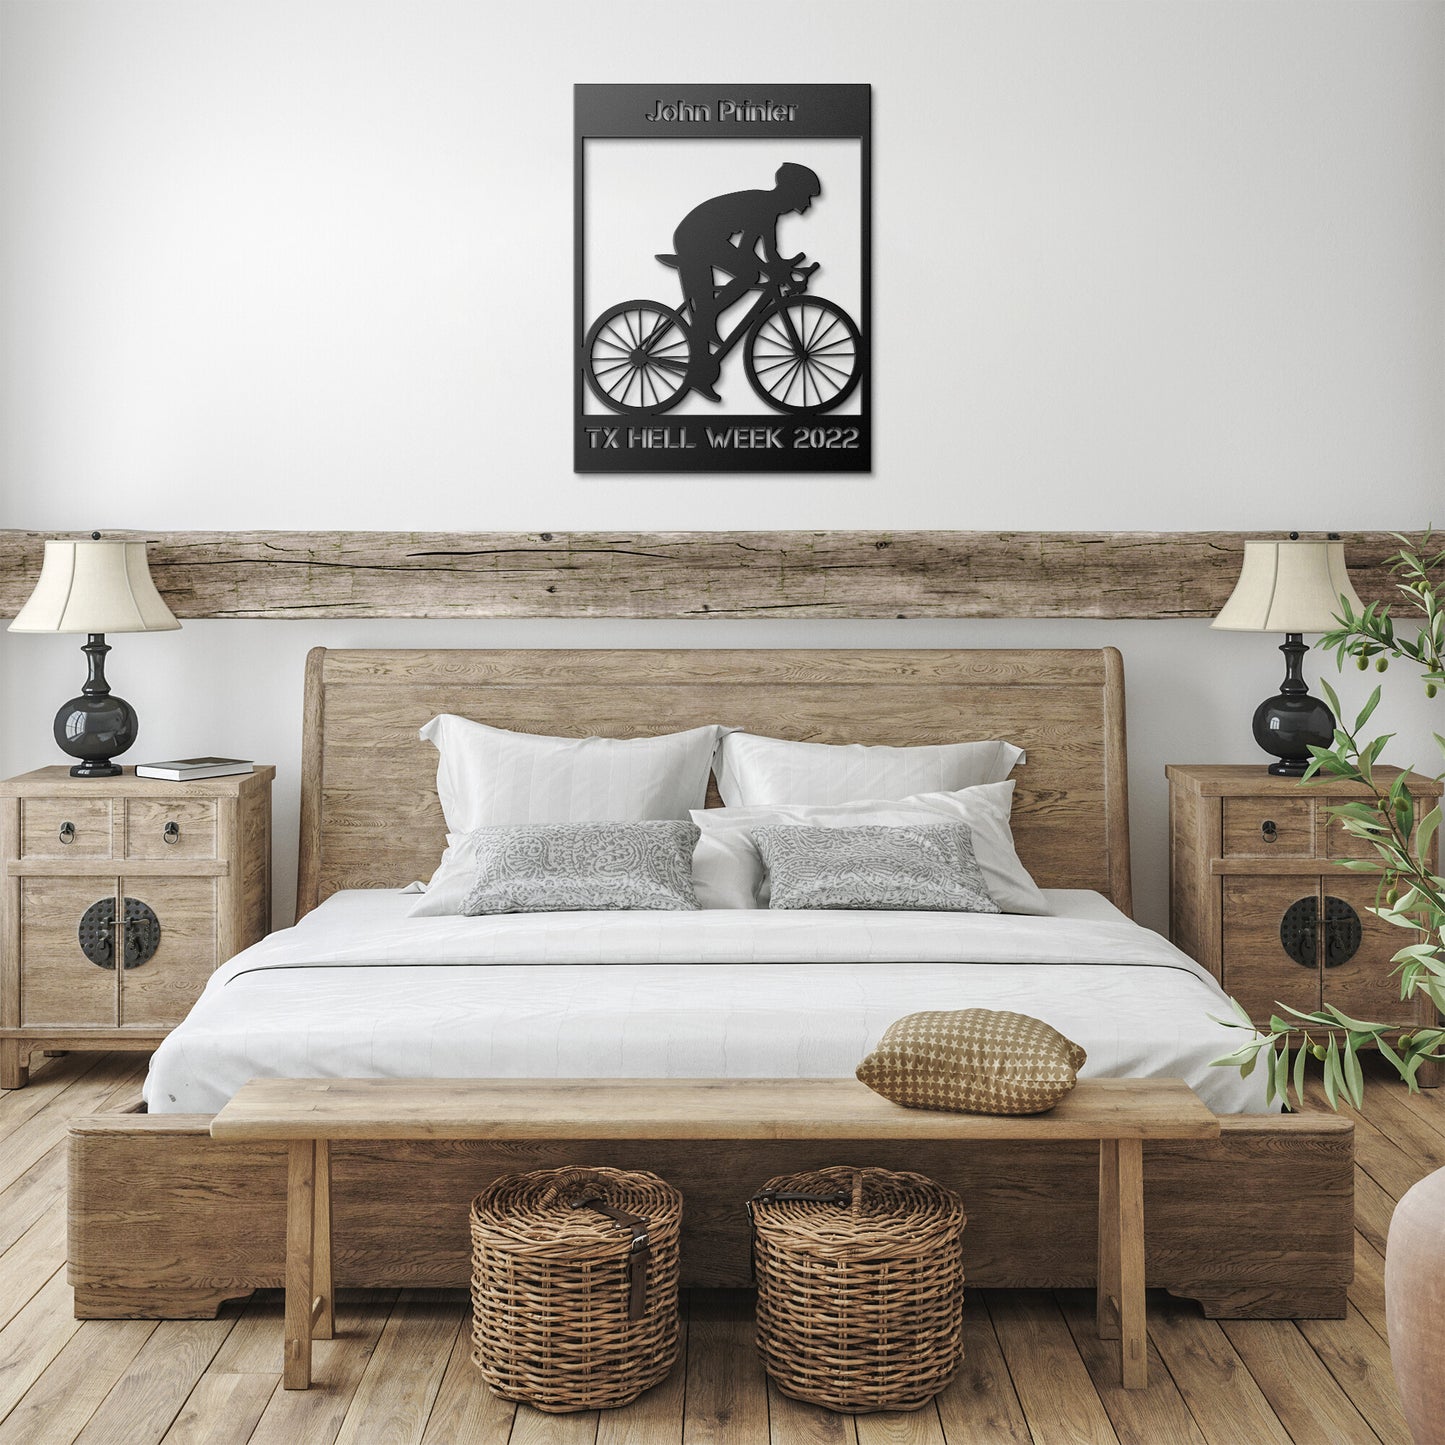 Personalized Cyclist Metal Wall Art Poster